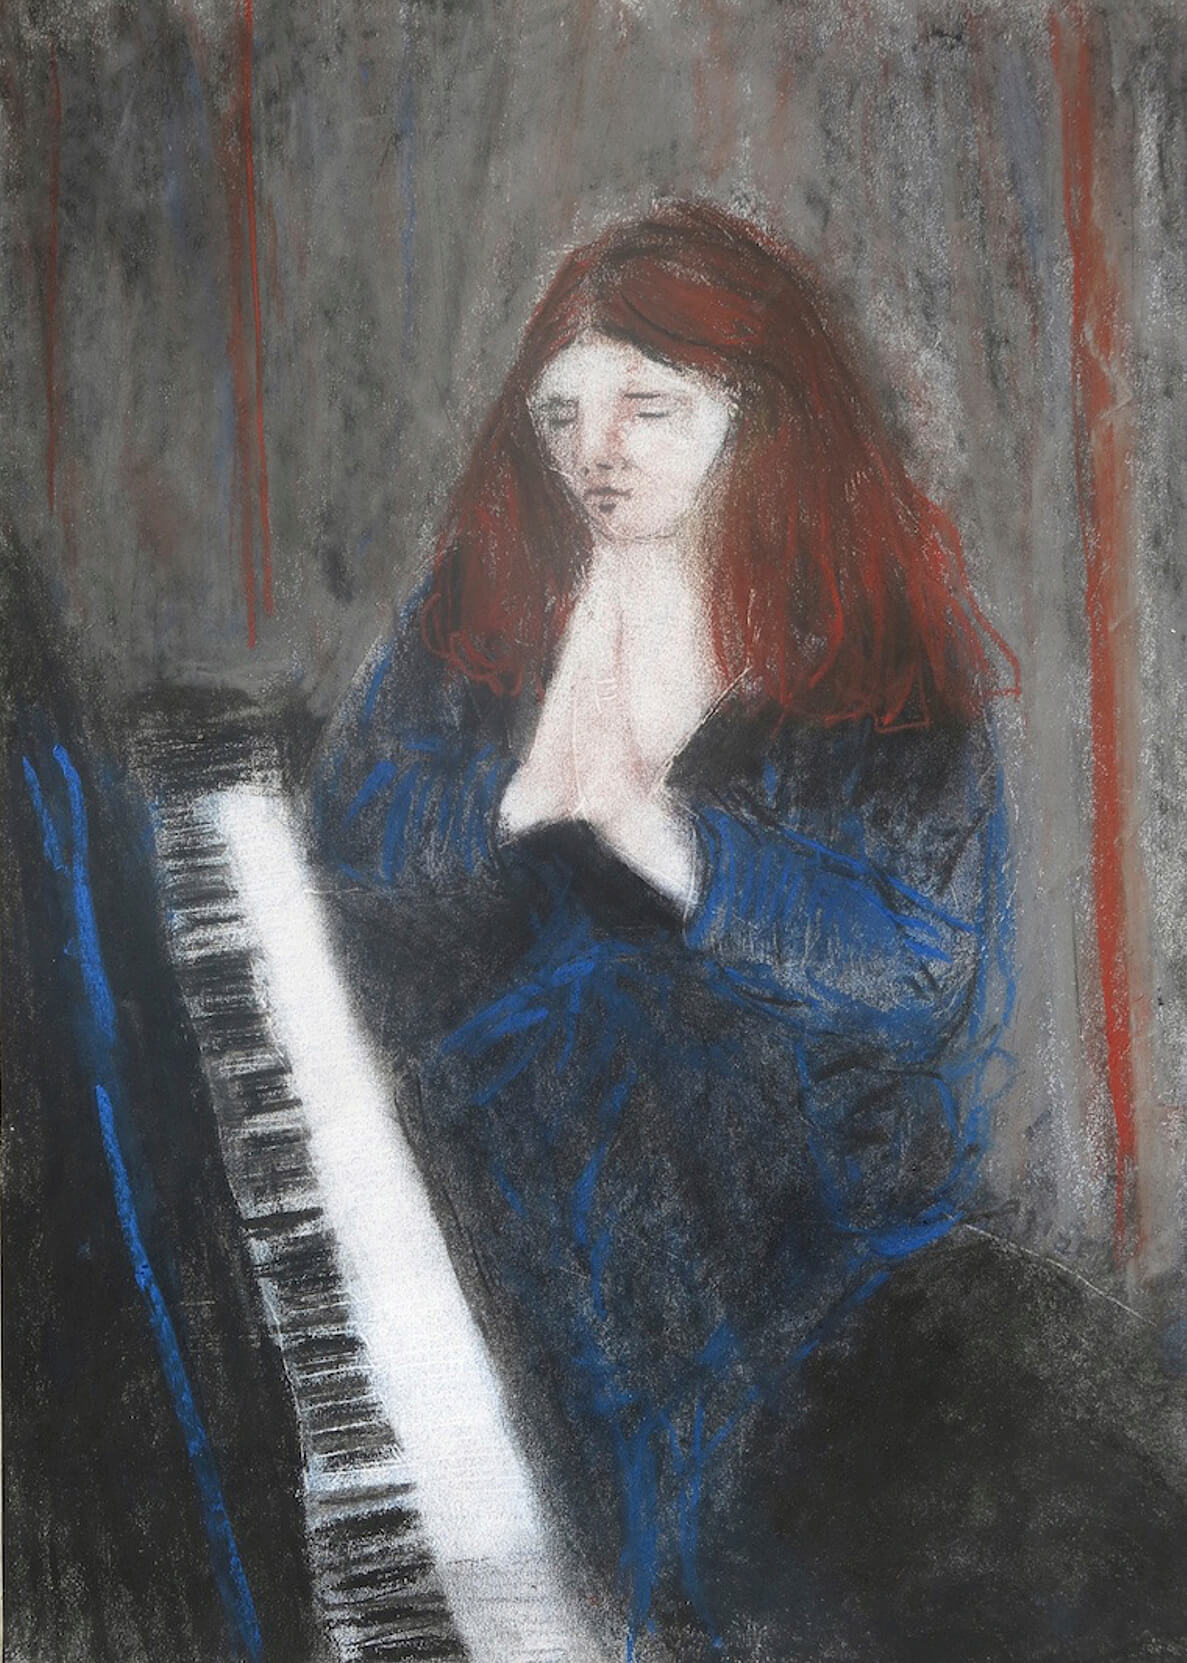 His daughter Sultan, a pianist